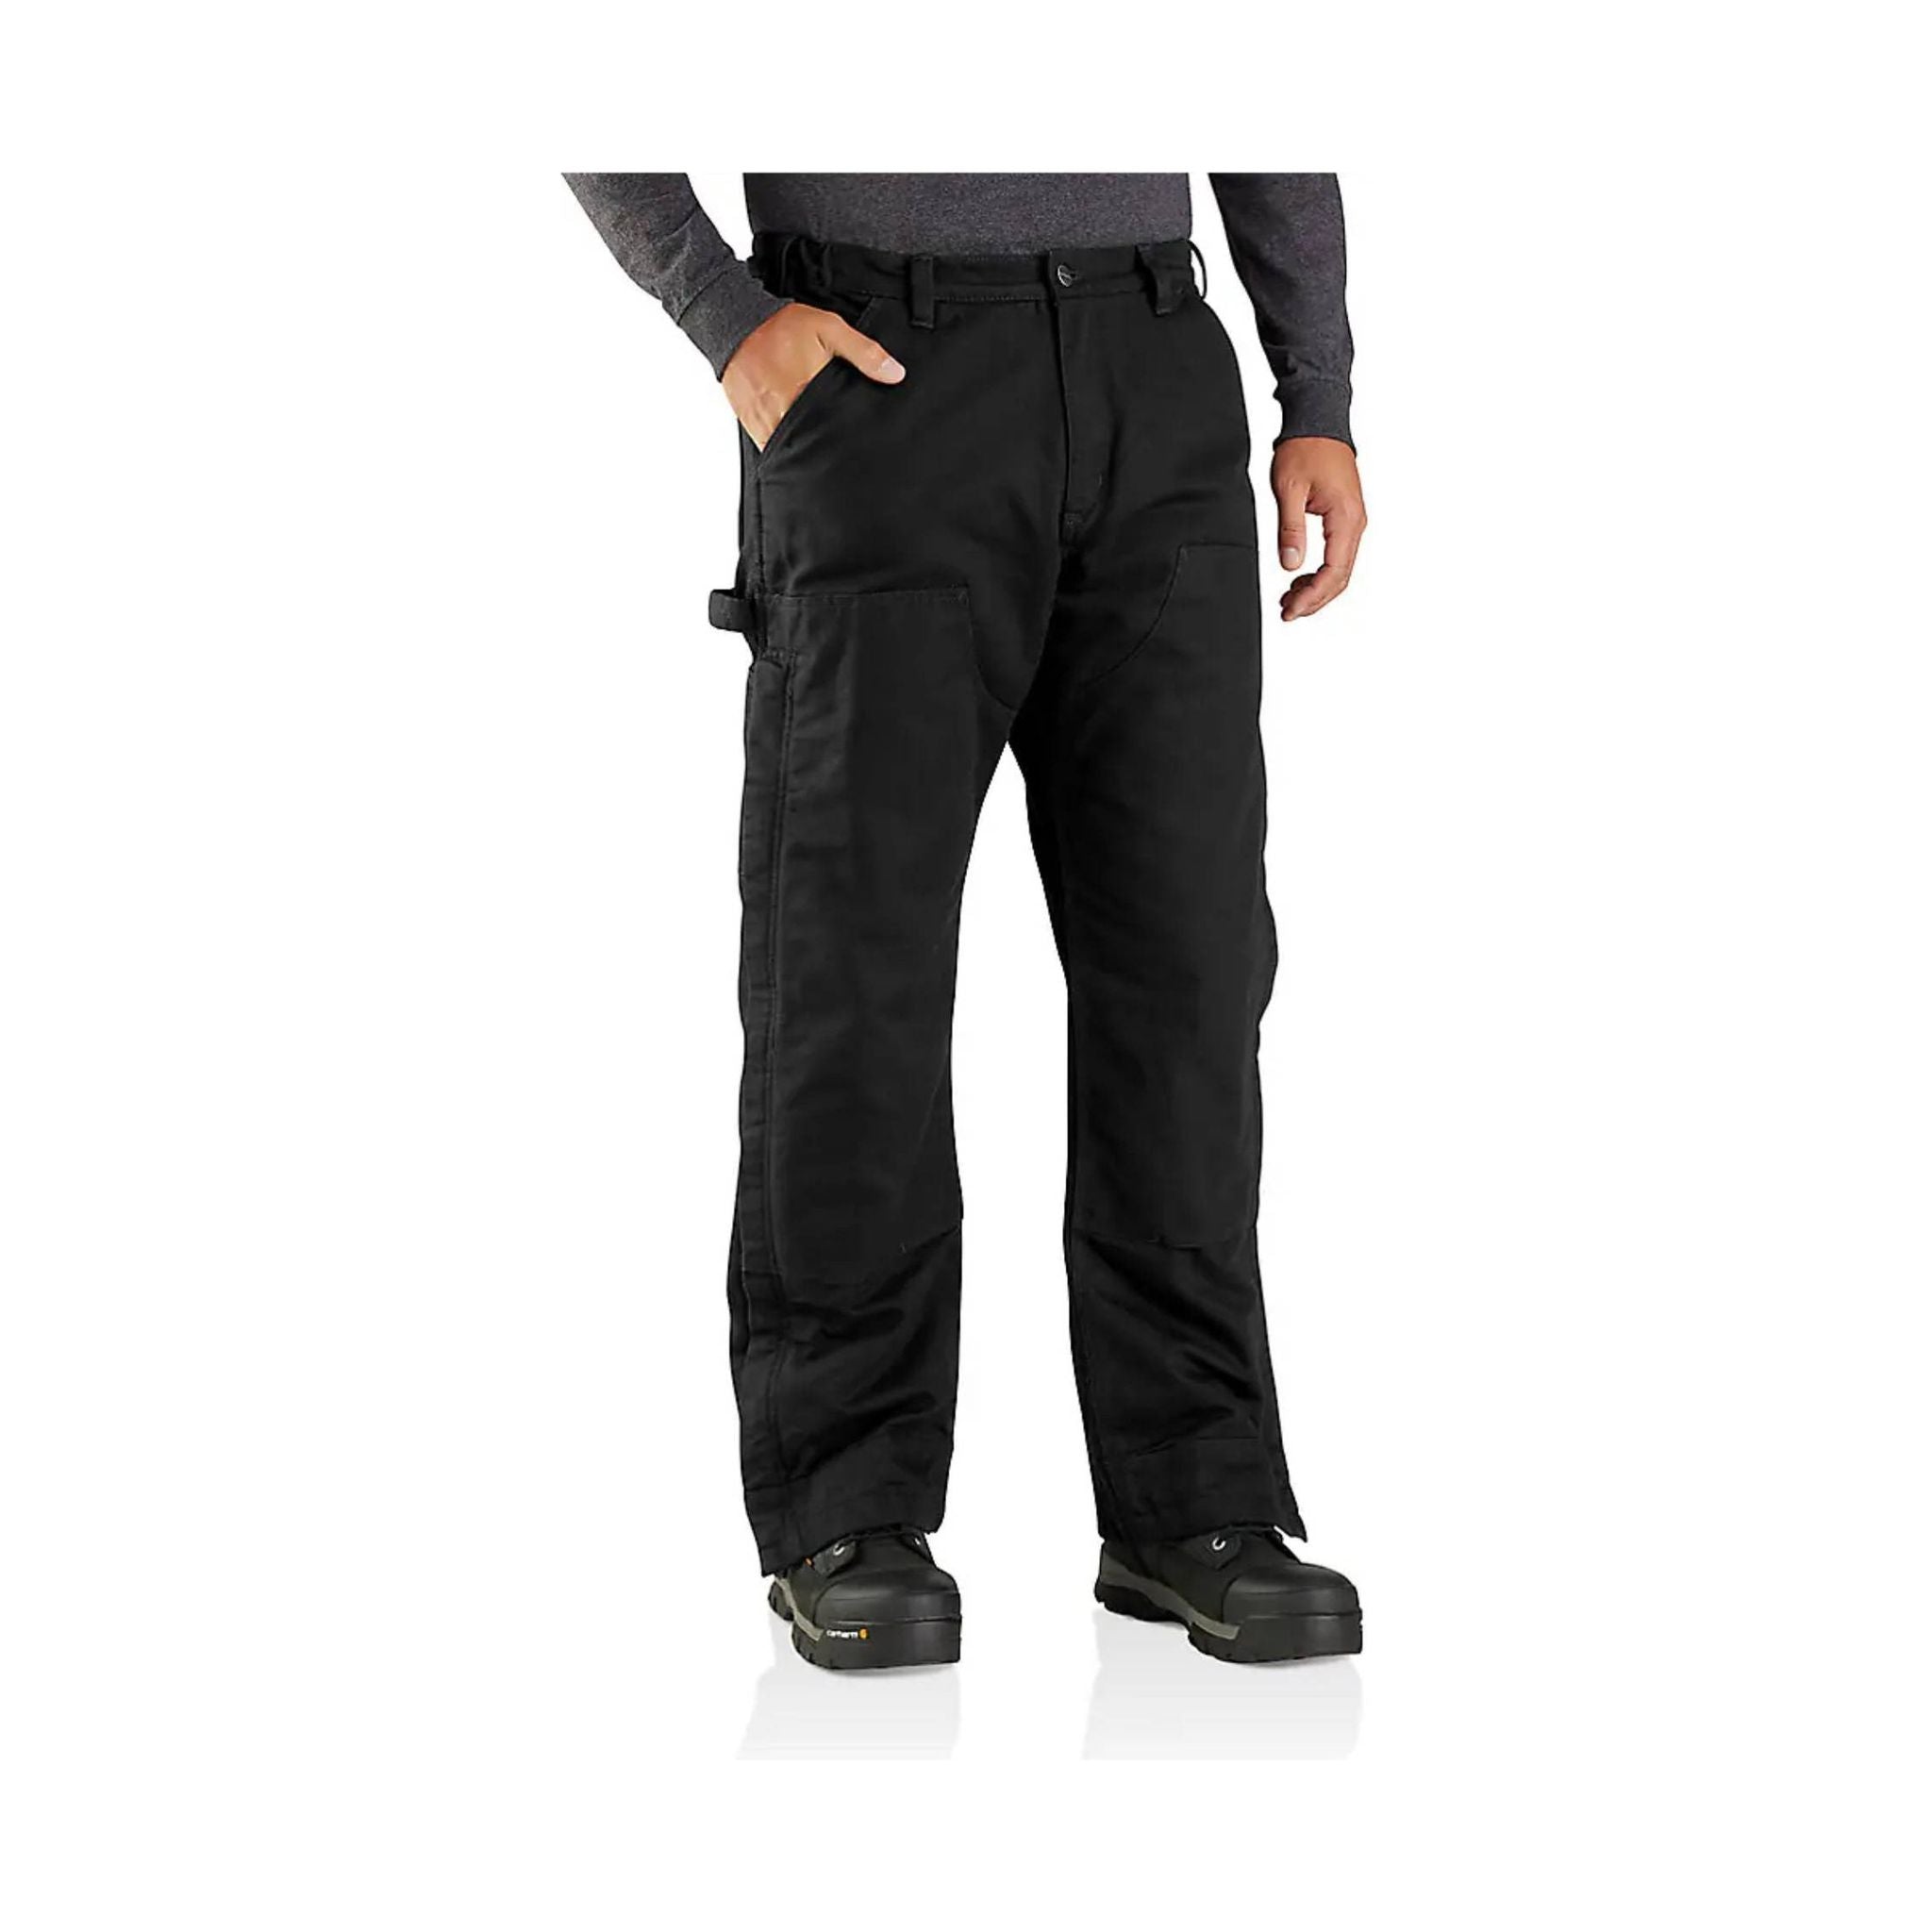 Men's Rugged Flex Relaxed Fit Ripstop Cargo Fleece-Lined Work Pant